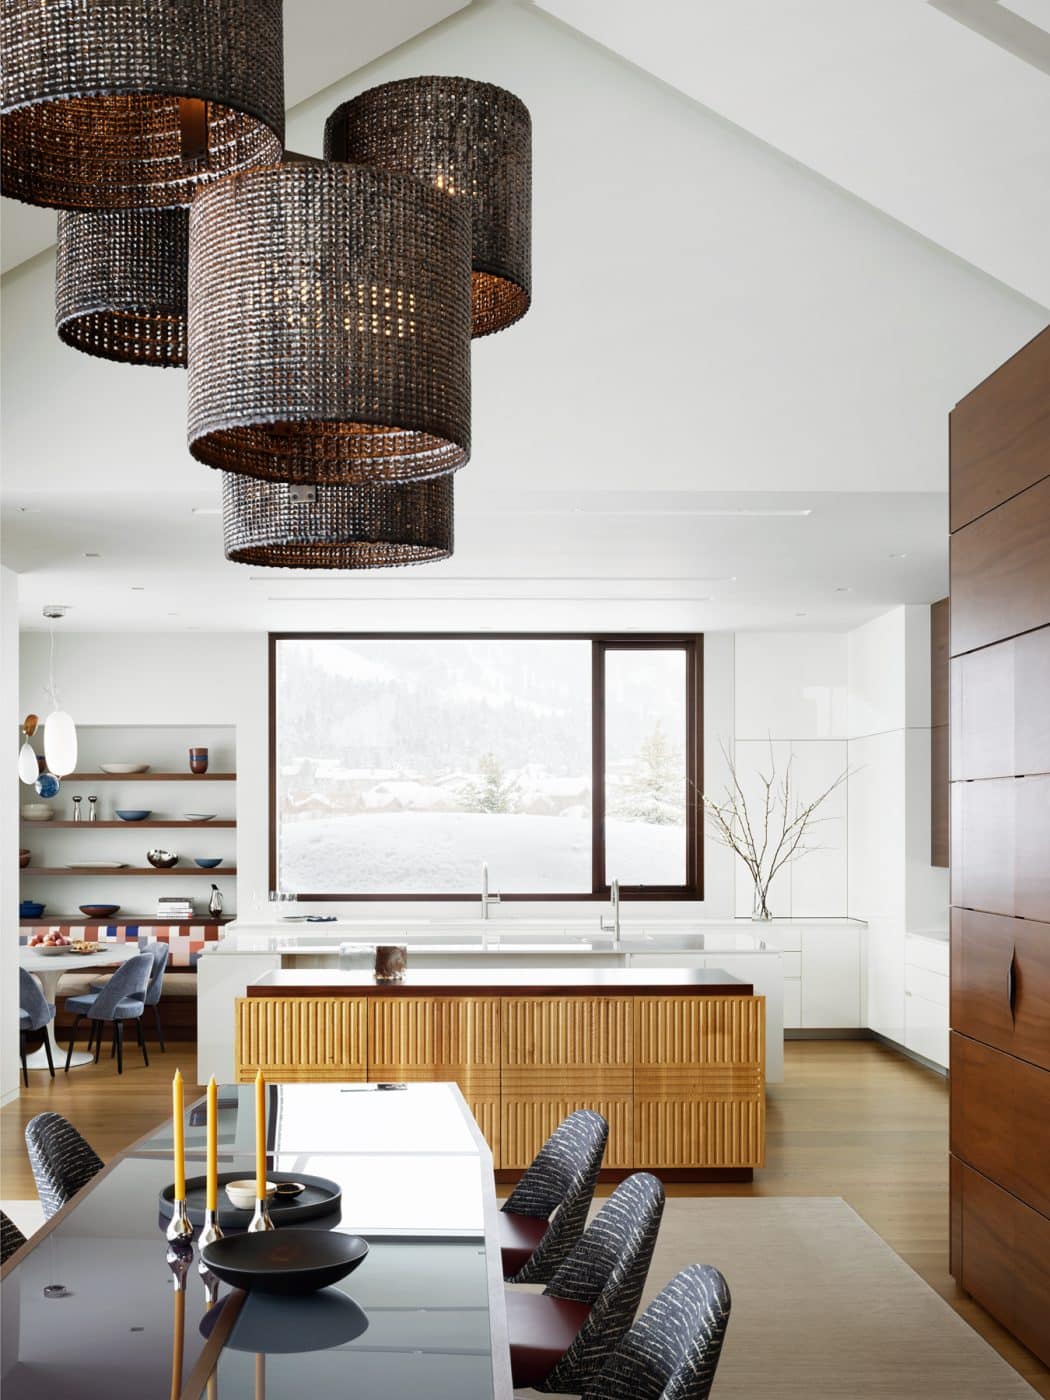 Dining area featuring textured furniture